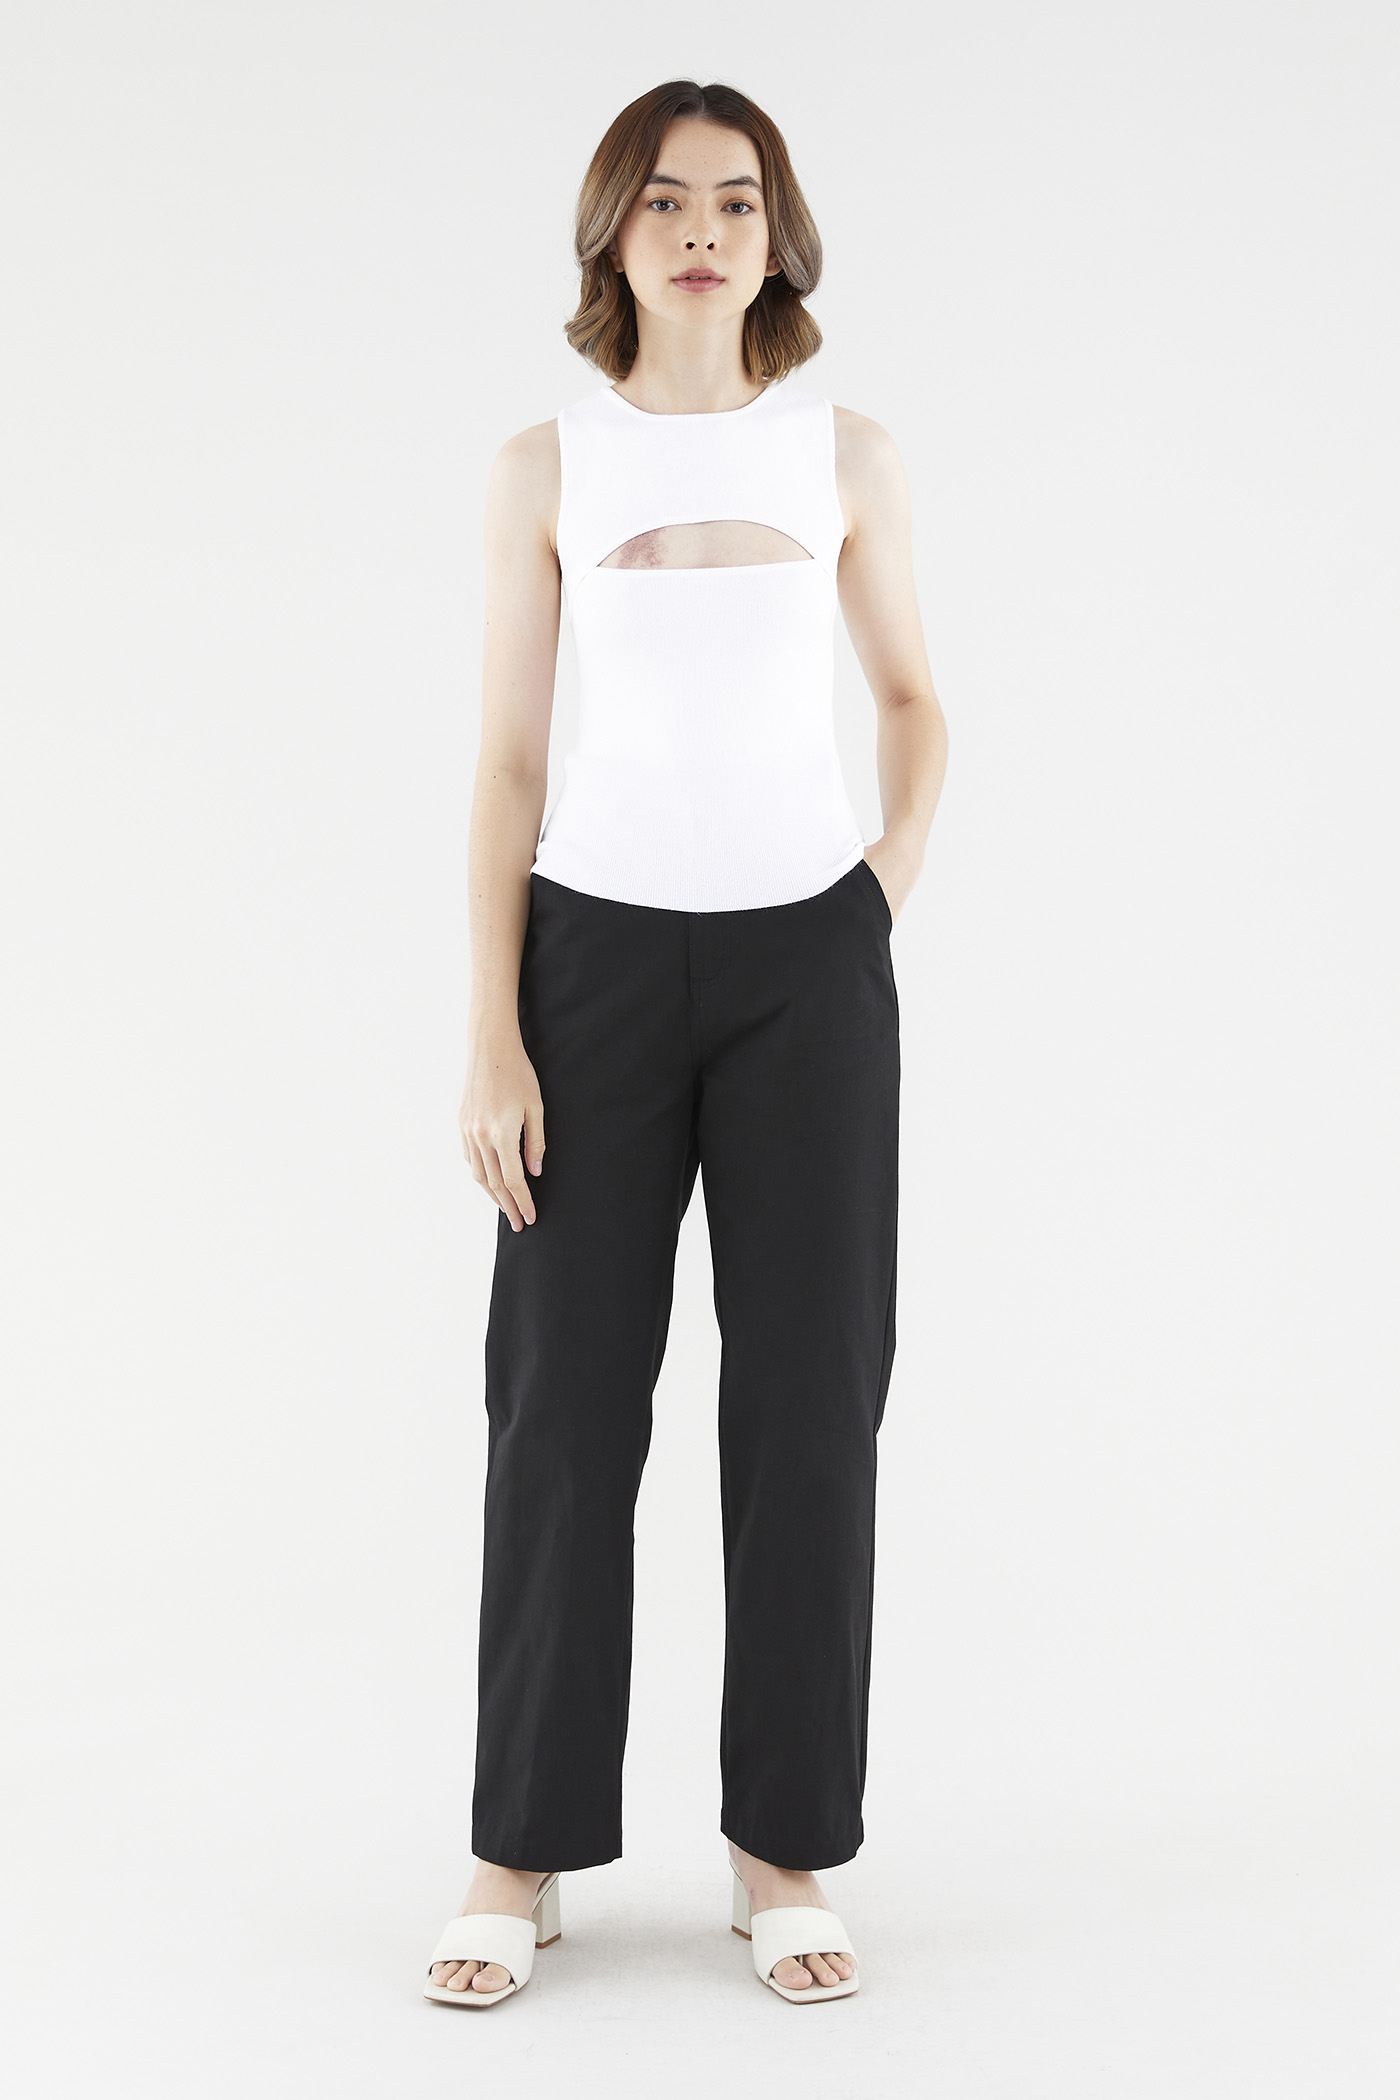 Perle Front Cut-Out Top